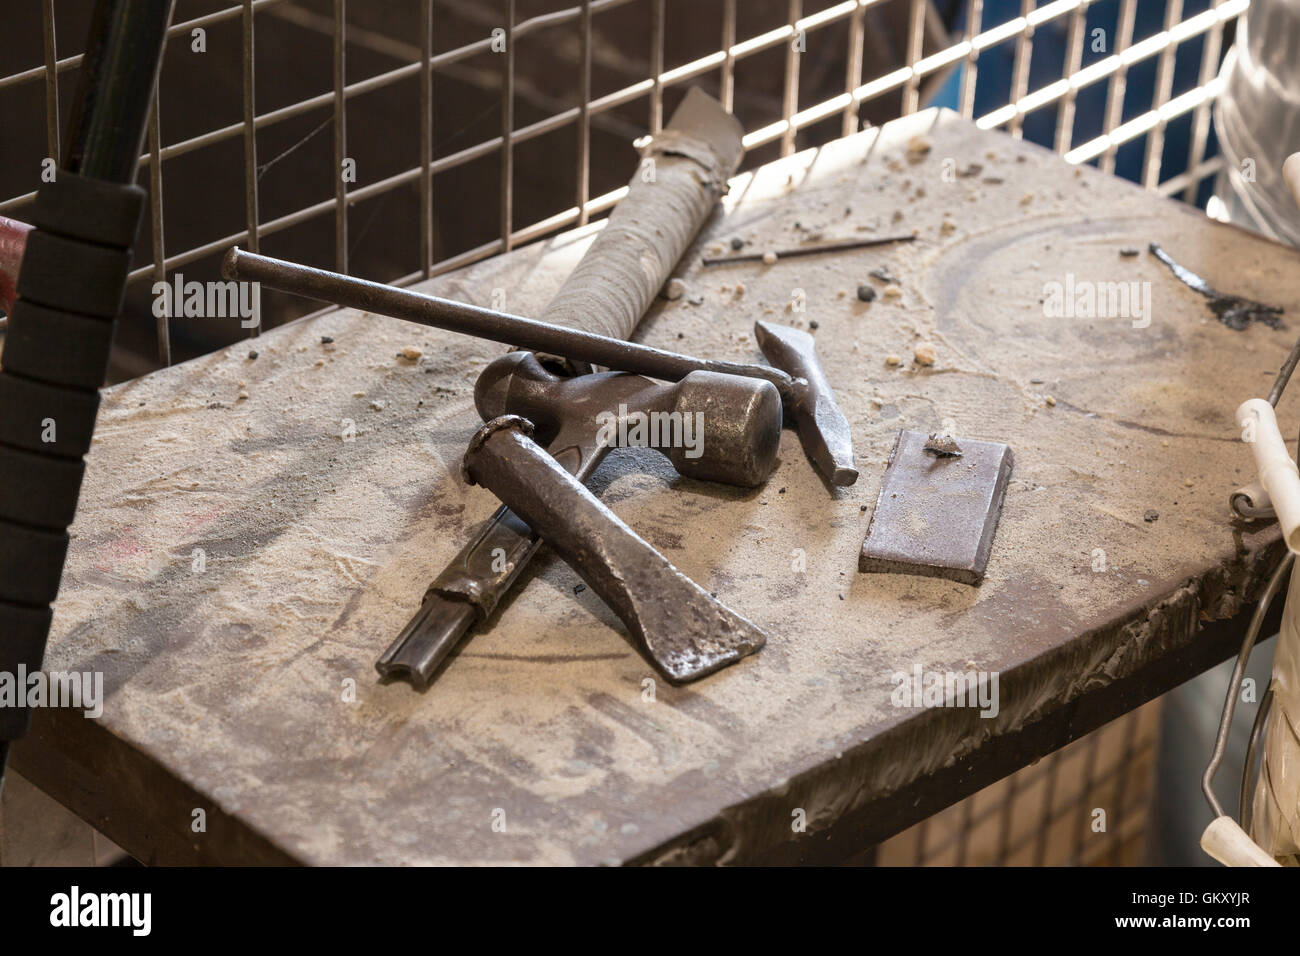 steel tools for manufacturing on a steel bench Stock Photo